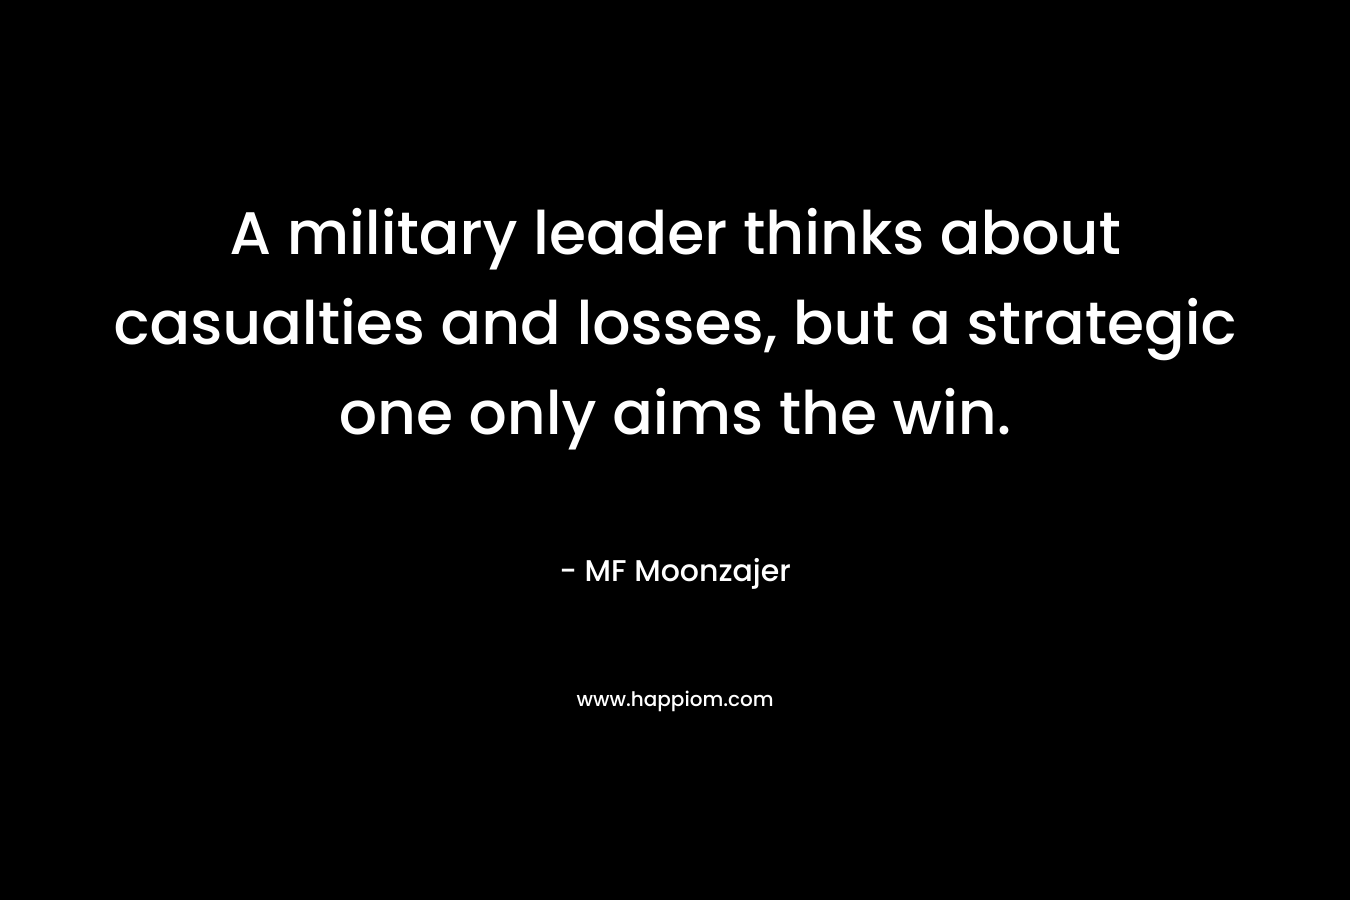 A military leader thinks about casualties and losses, but a strategic one only aims the win. – MF Moonzajer